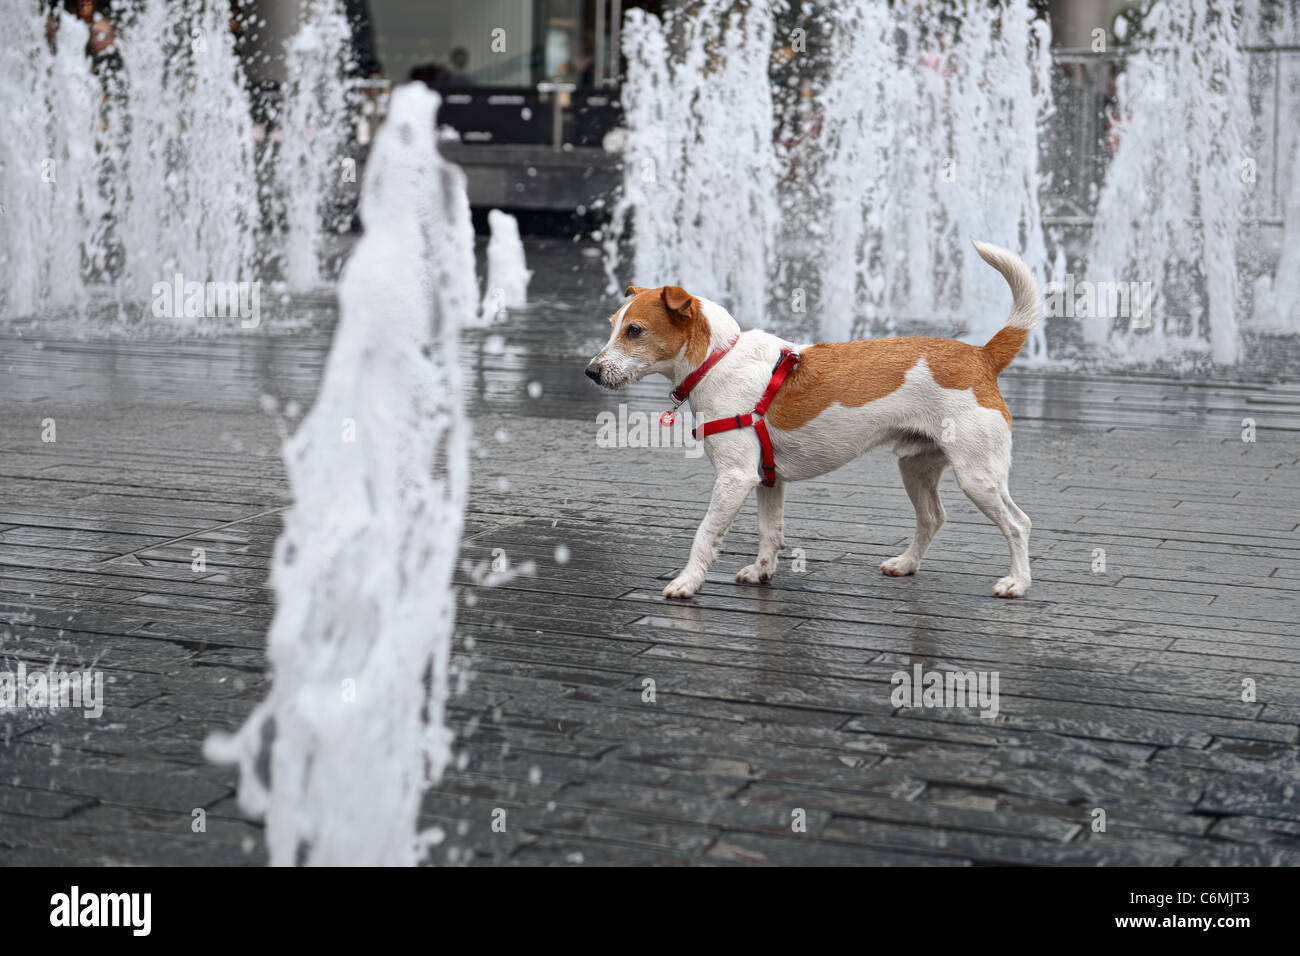 Wet smooth coated Parson Jack Russell Terrier wandering through a fountain Stock Photo